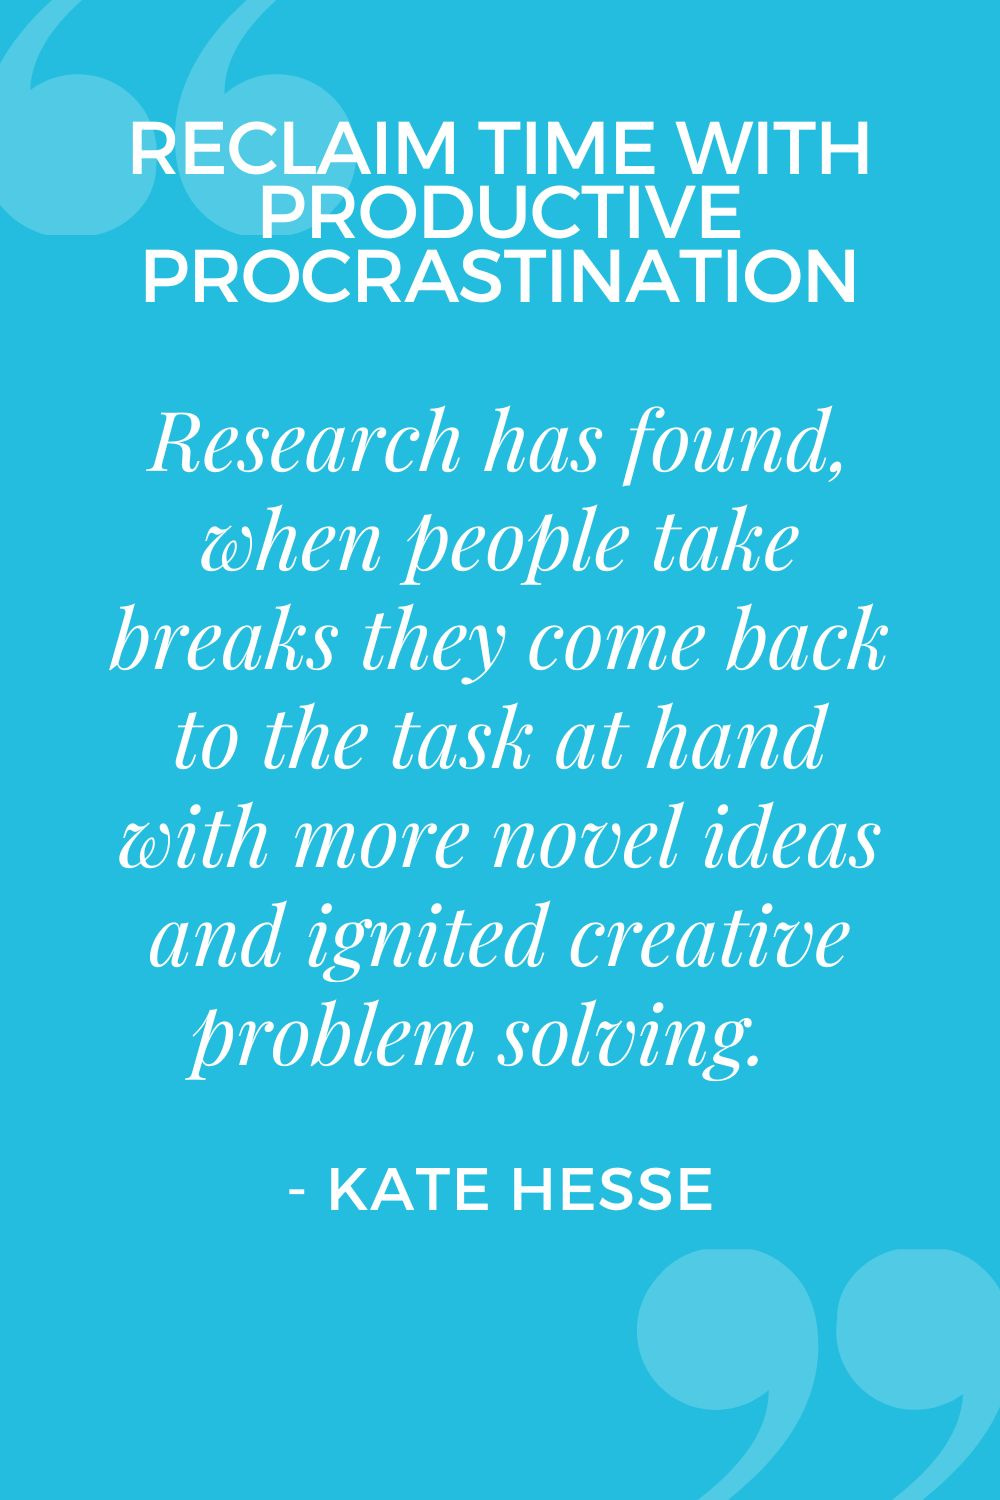 Research has found when people take breaks they come back to the task at hand with more novel ideals and ignited creative problem solving.